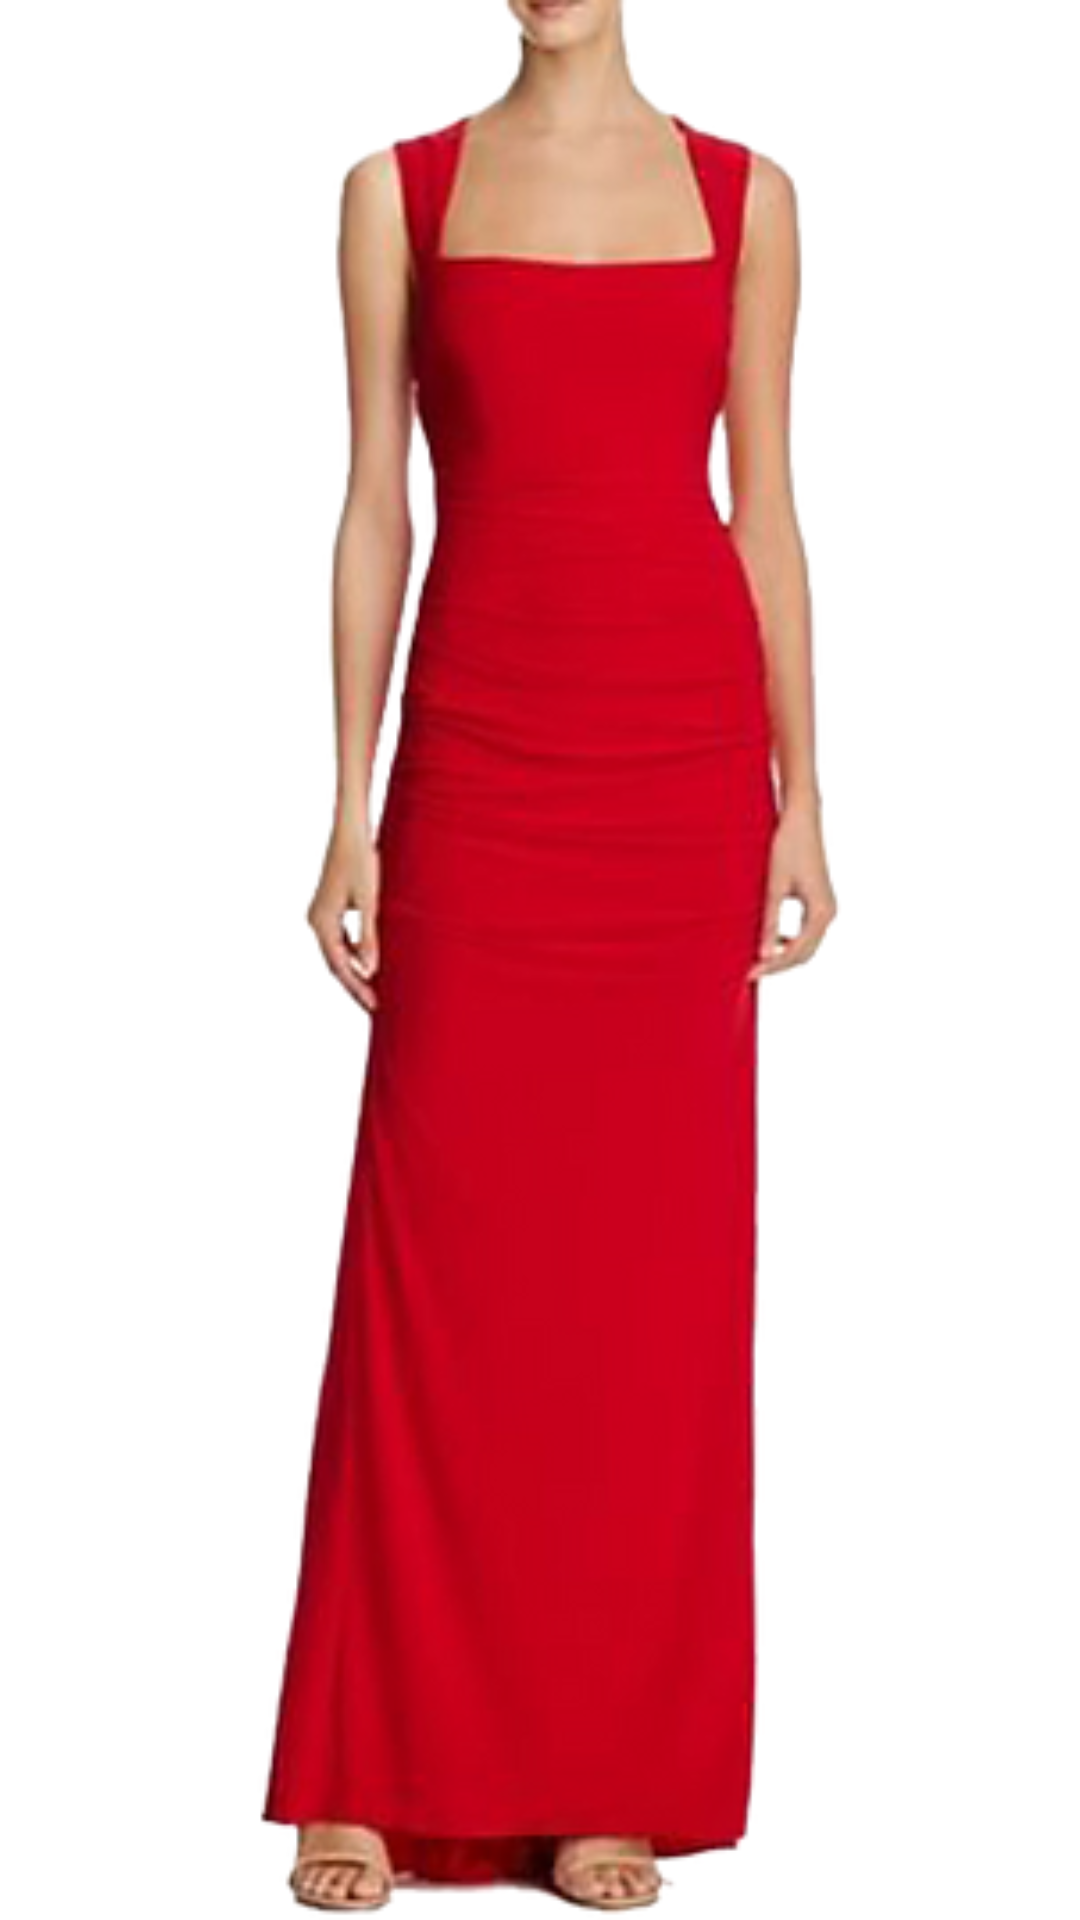 Adrianna Papell Riley Open Back Jersey Gown in Red